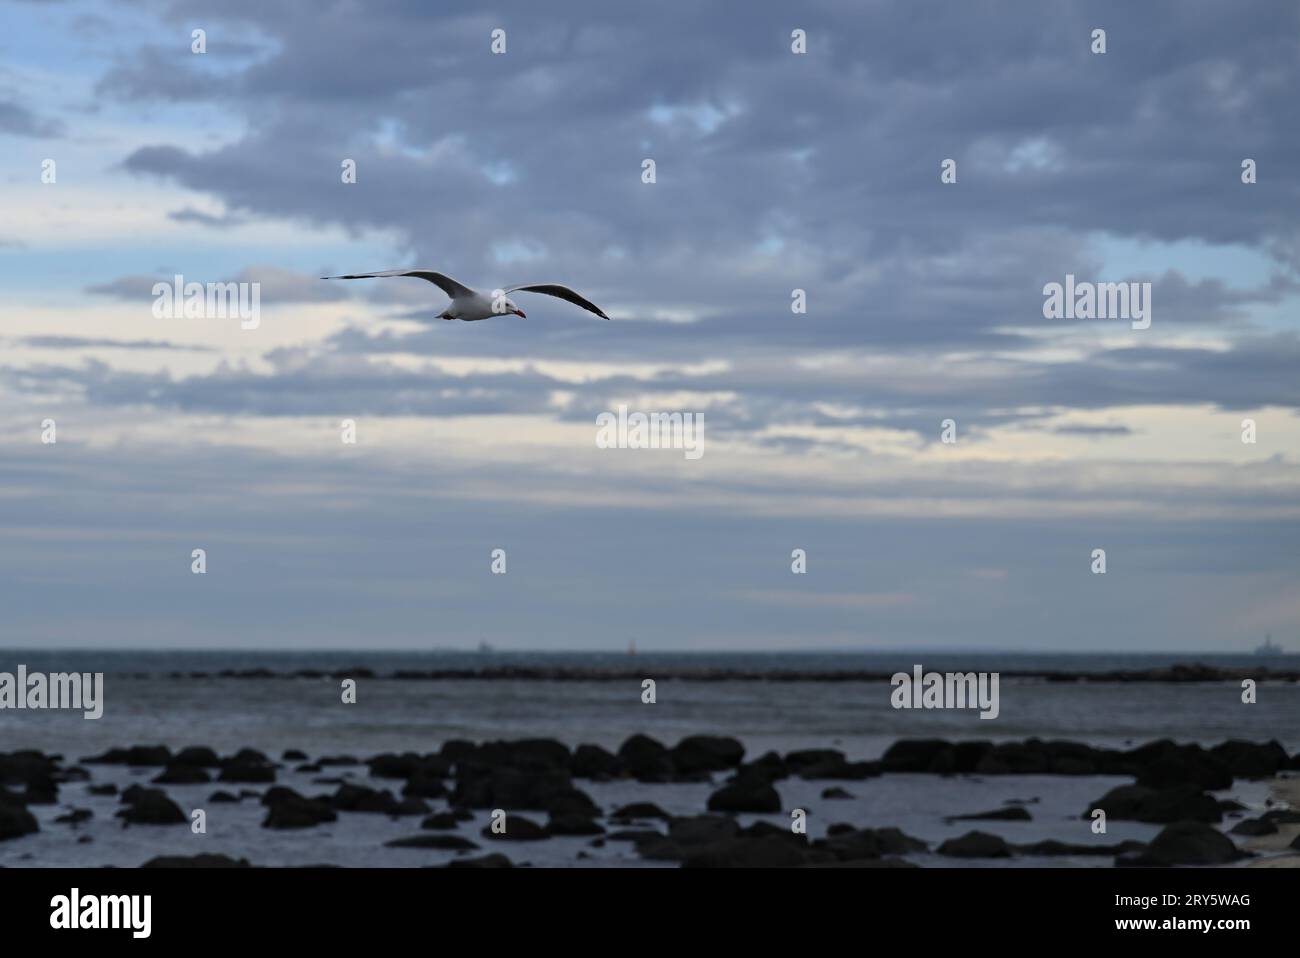 Seagull, or silver gull, in flight over rocks in the shallow water by a beach, during a grey and cloudy day Stock Photo